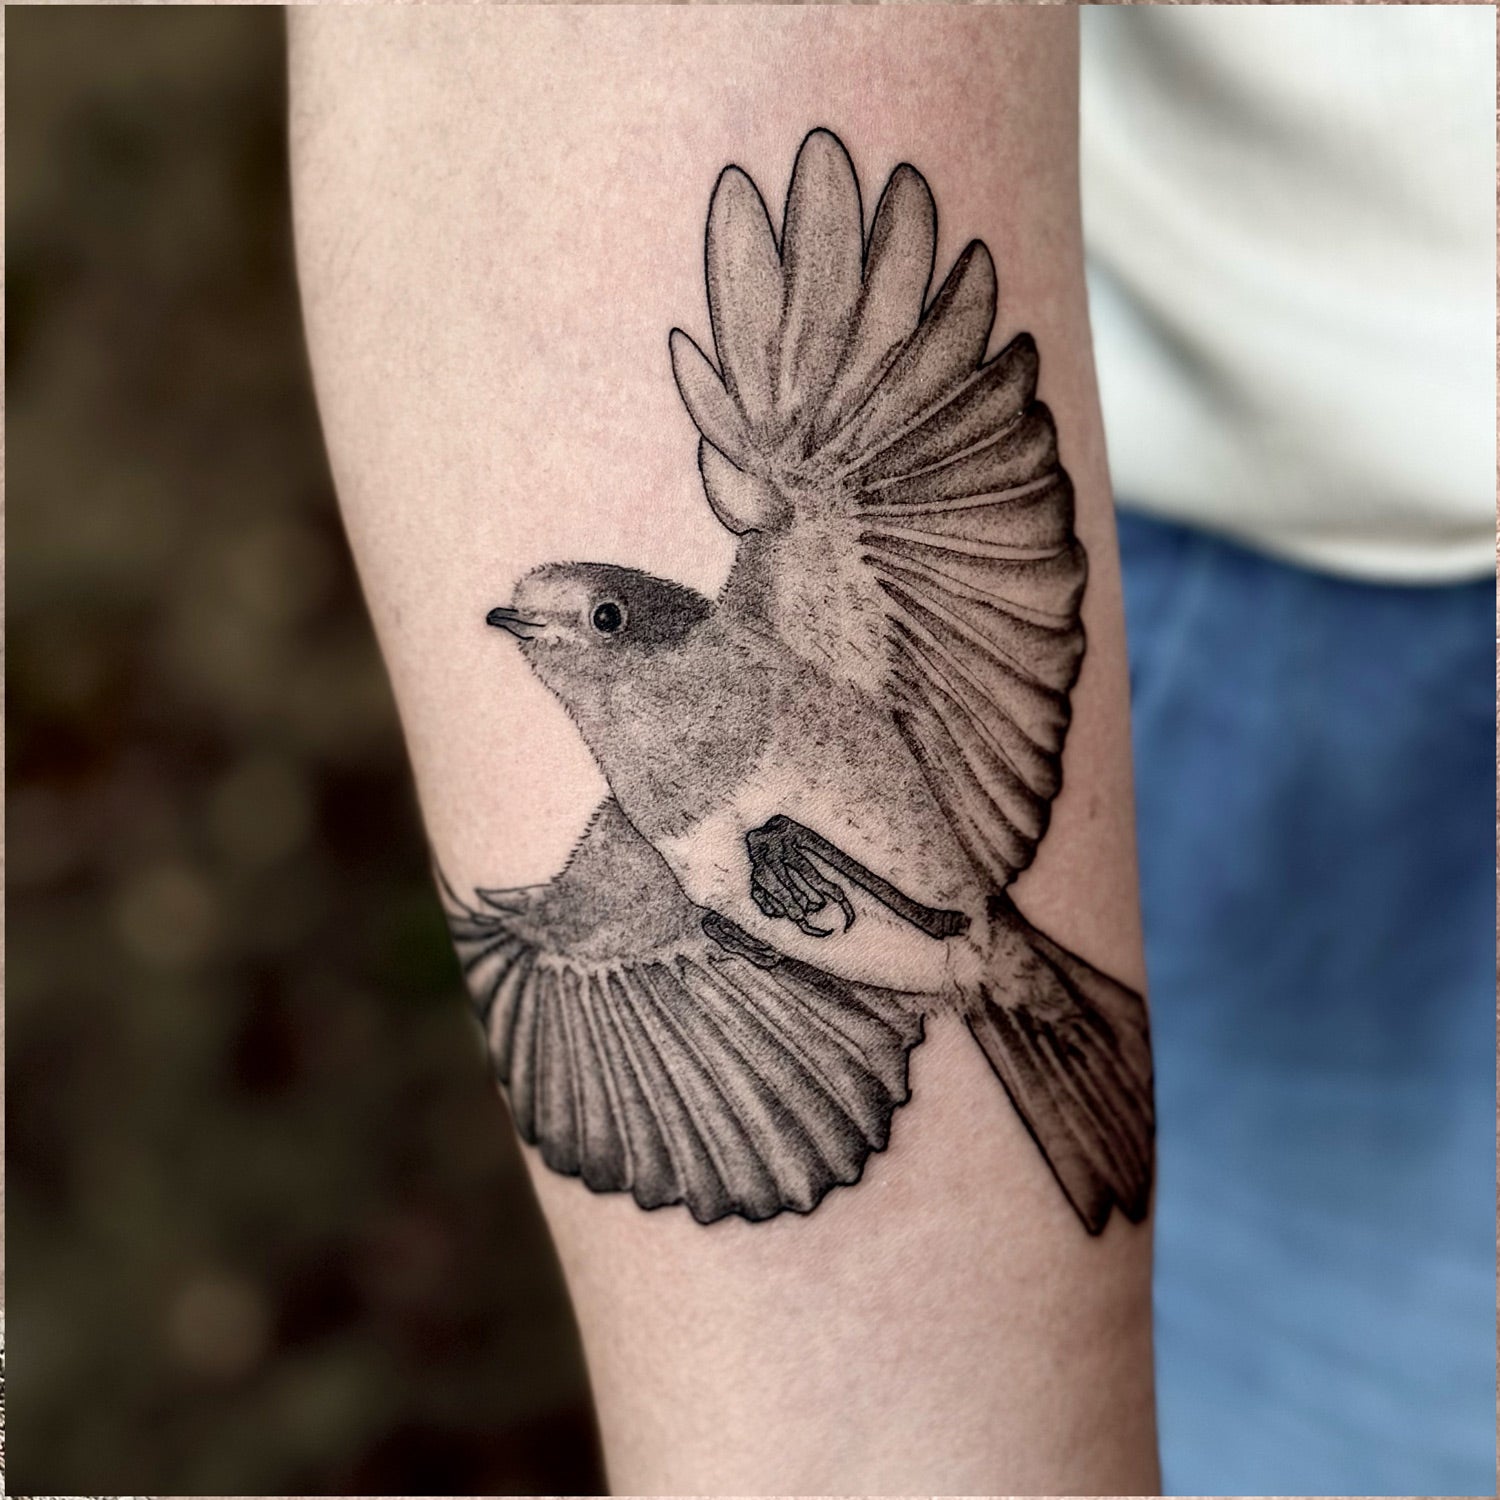 Realistic Bird tattoo black and gray by Danny Schreiber